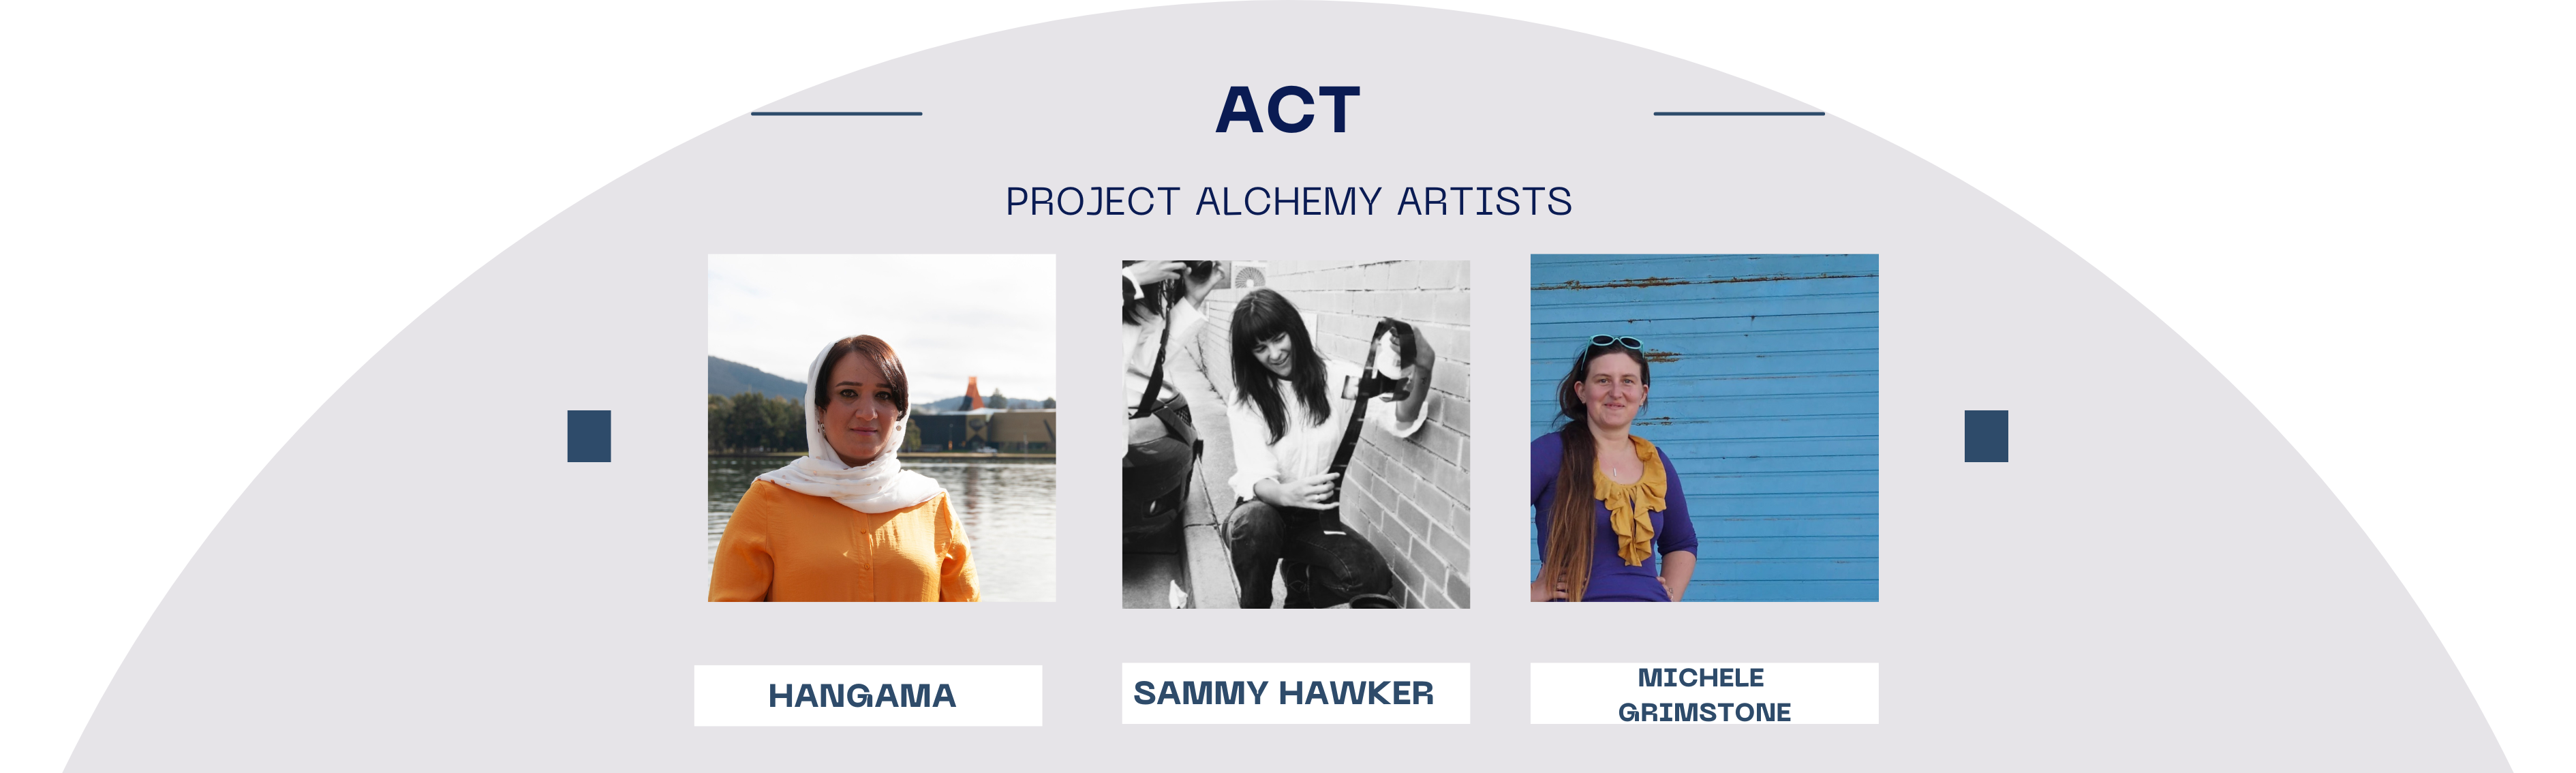 ACT Project Alchemy Artists